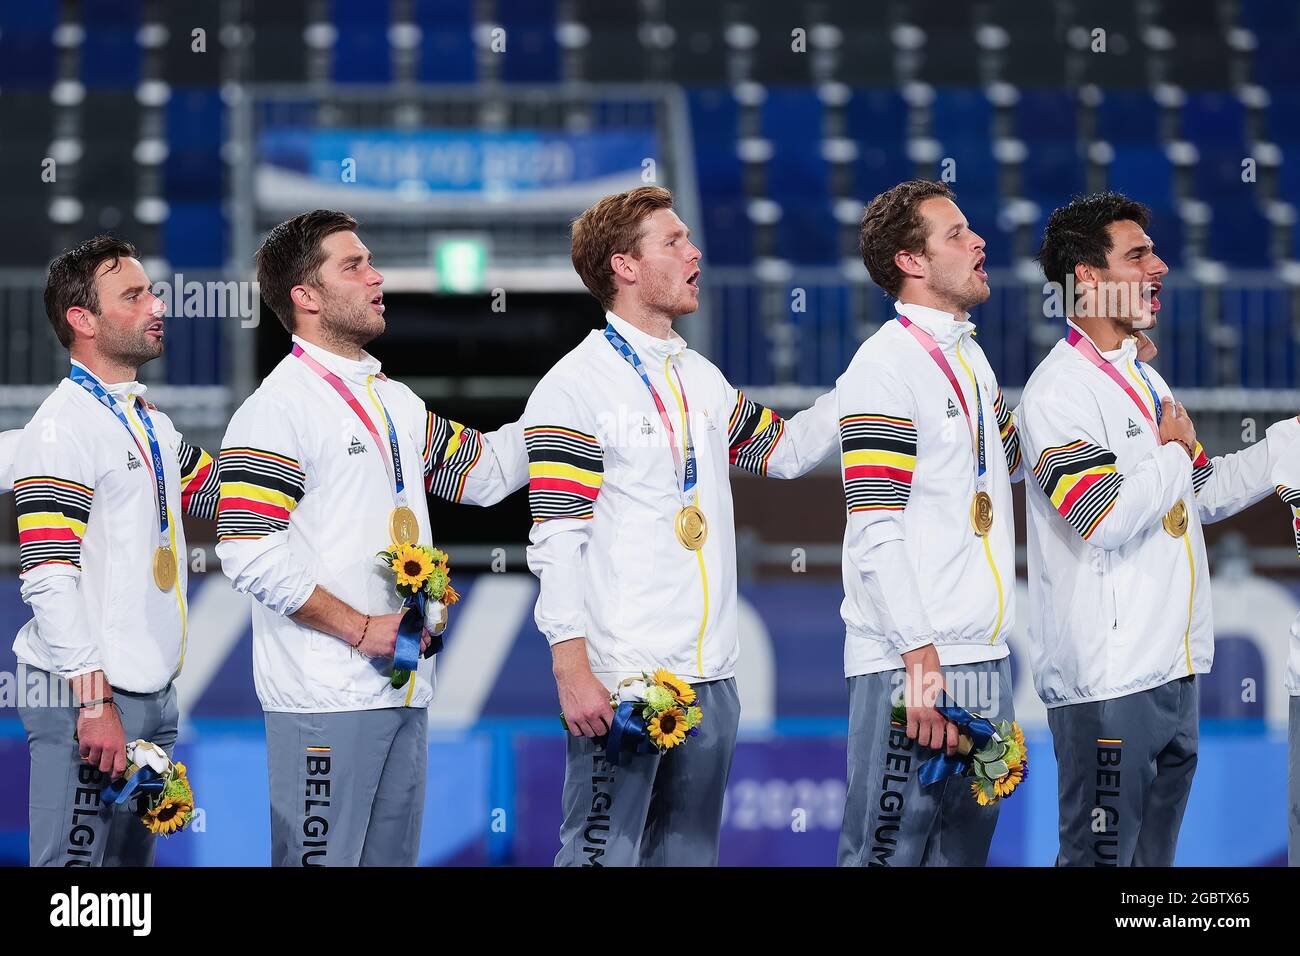 Tokyo, Japan, 5 August, 2021. Belgium players since their anthem during the Men's Hockey Gold Medal match between Australia and Belgium on Day 13 of the Tokyo 2020 Olympic Games. Credit: Pete Dovgan/Speed Media/Alamy Live News Stock Photo